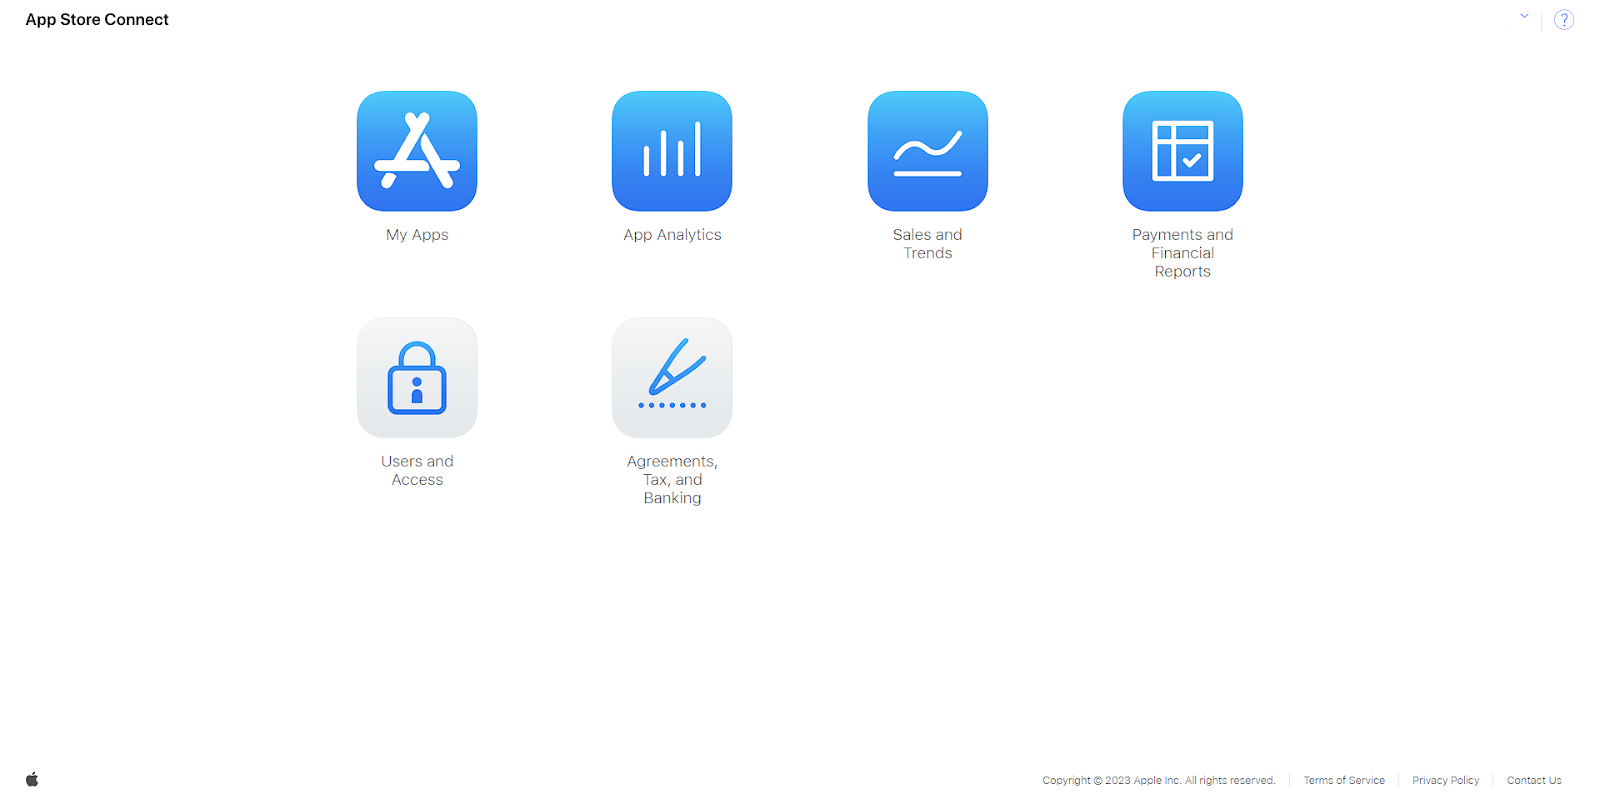 Another screenshot of the Apple App Store Connect UI, featuring My Apps, App Analytics, Sales and Trends, Payments and Financial Reports, Users and Access, Agreements, Tax, and Banking